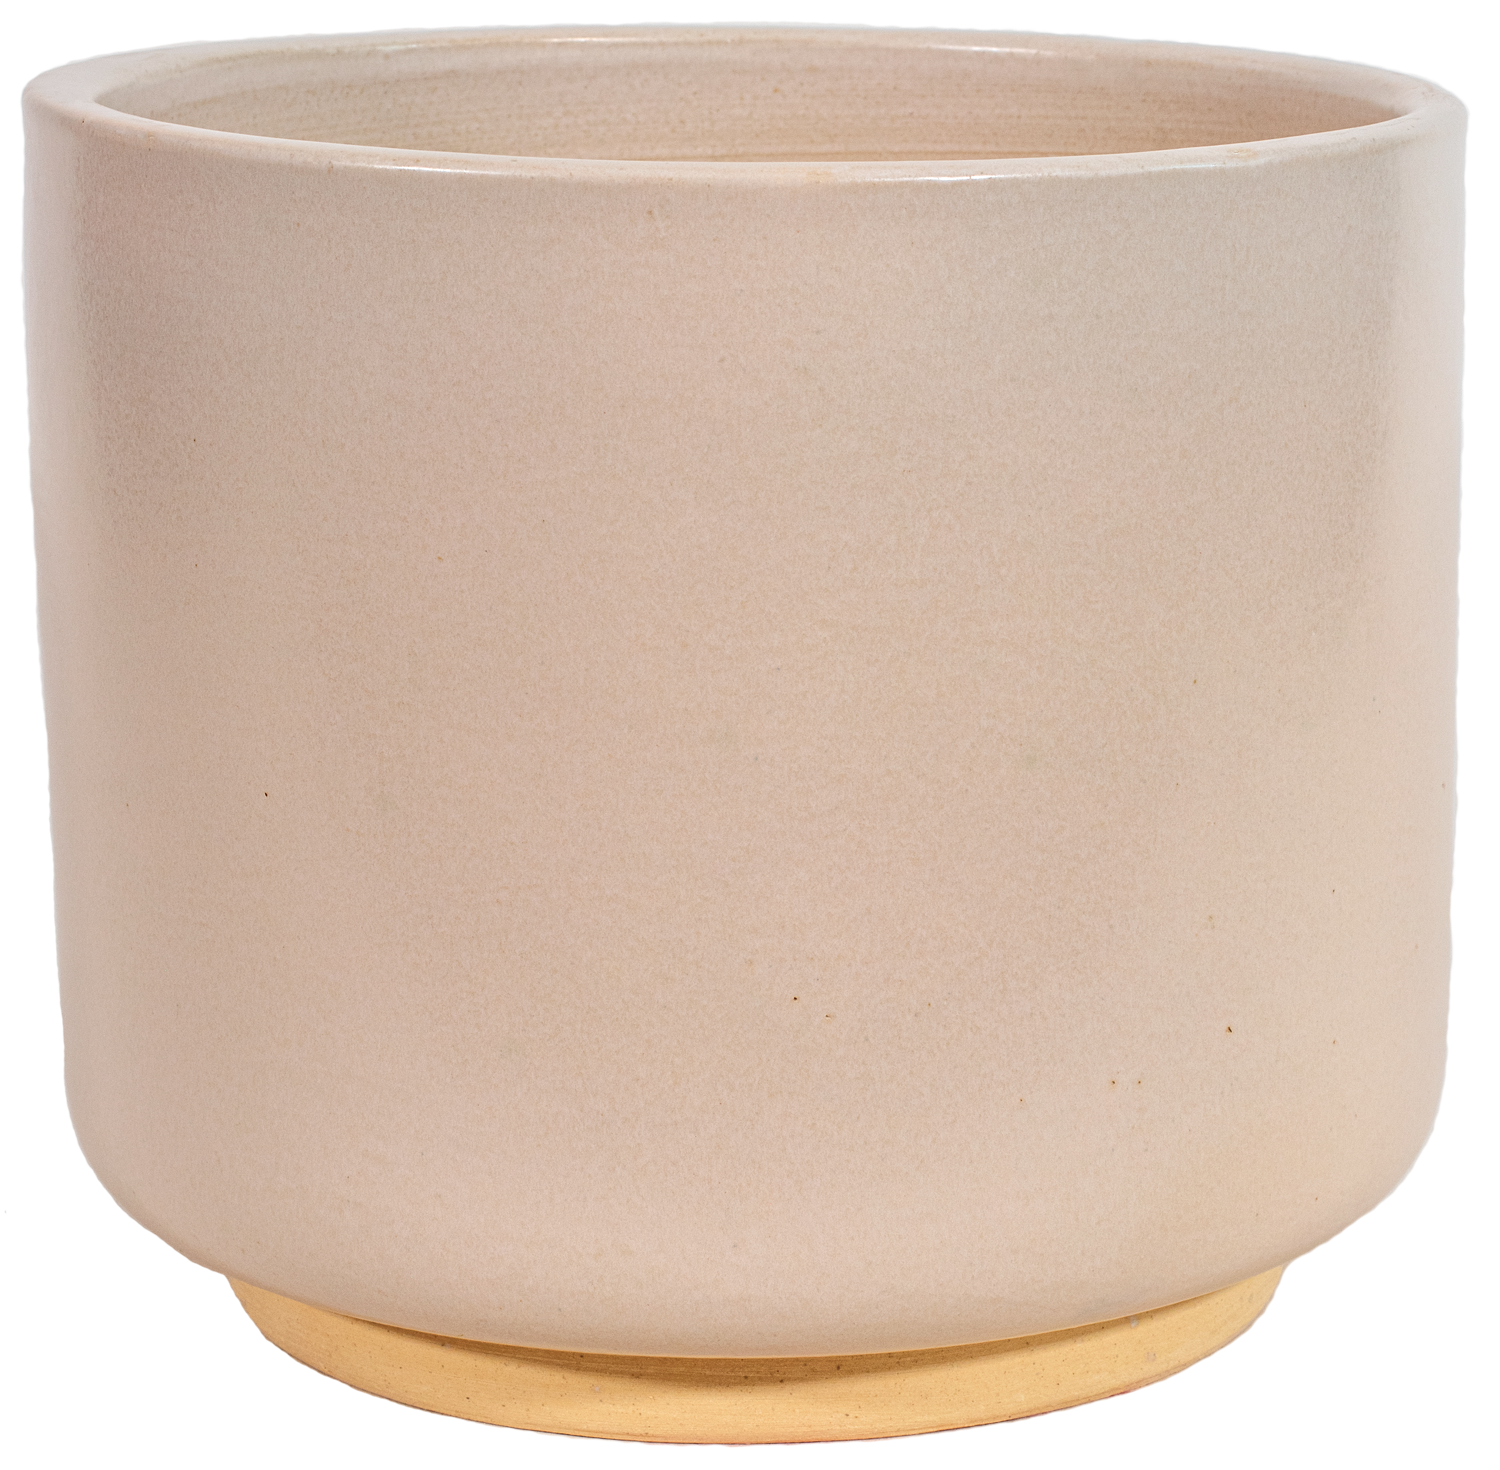 medium white ceramic cylinder planter in a modern style with small pedestal foot